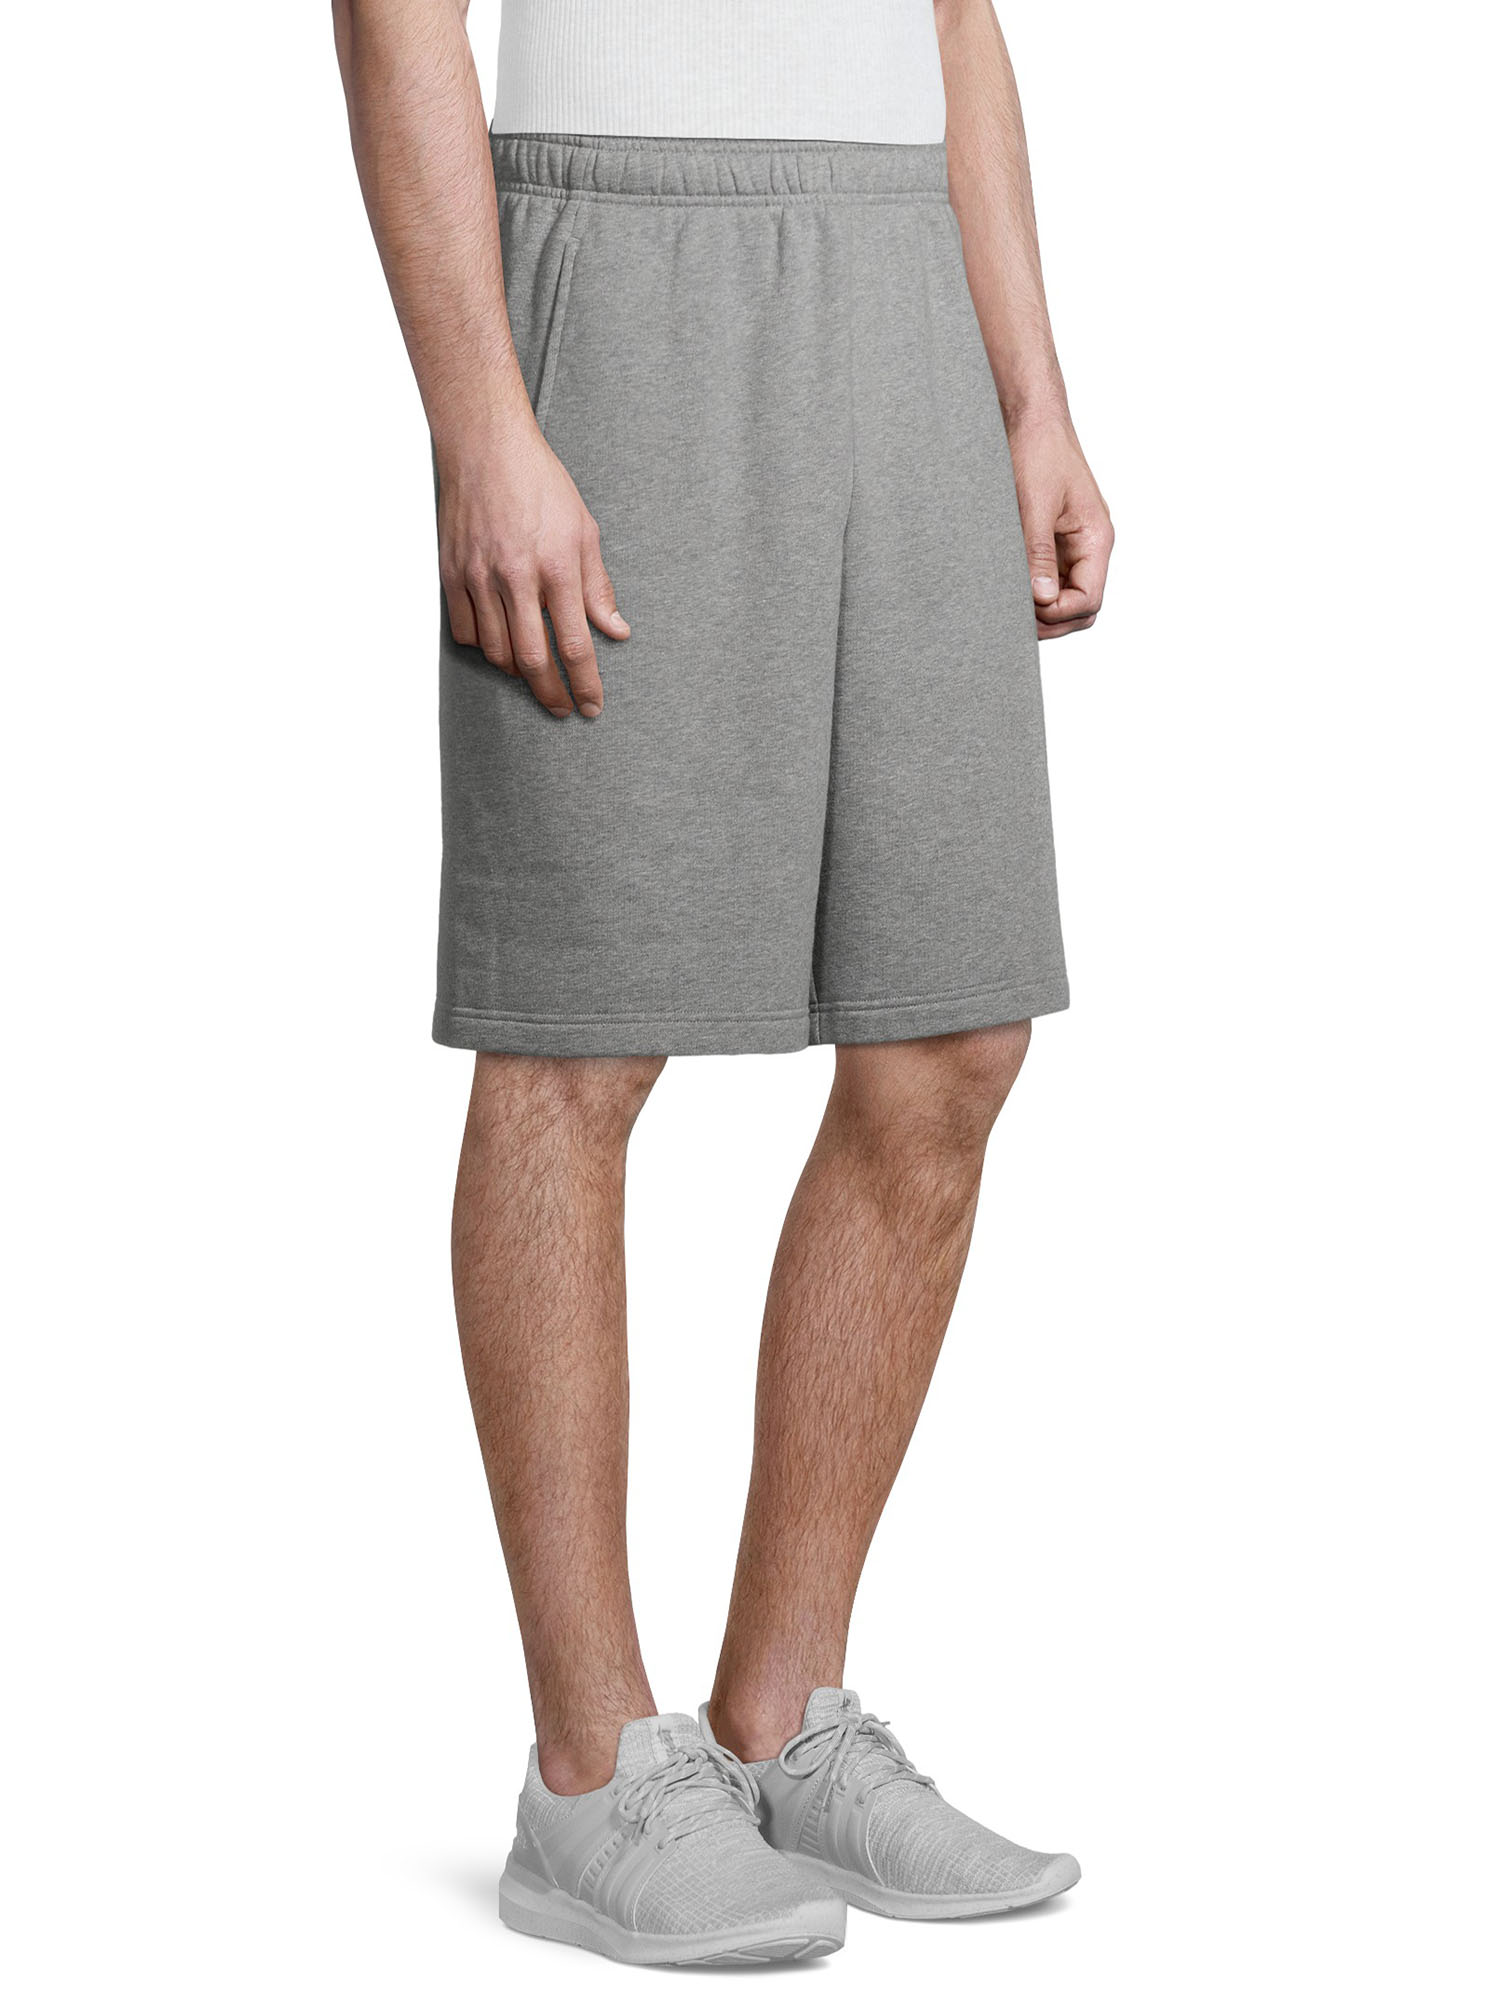 Athletic Works Men's and Big Men's Active Fleece Short, up to Size 5XL - image 4 of 6